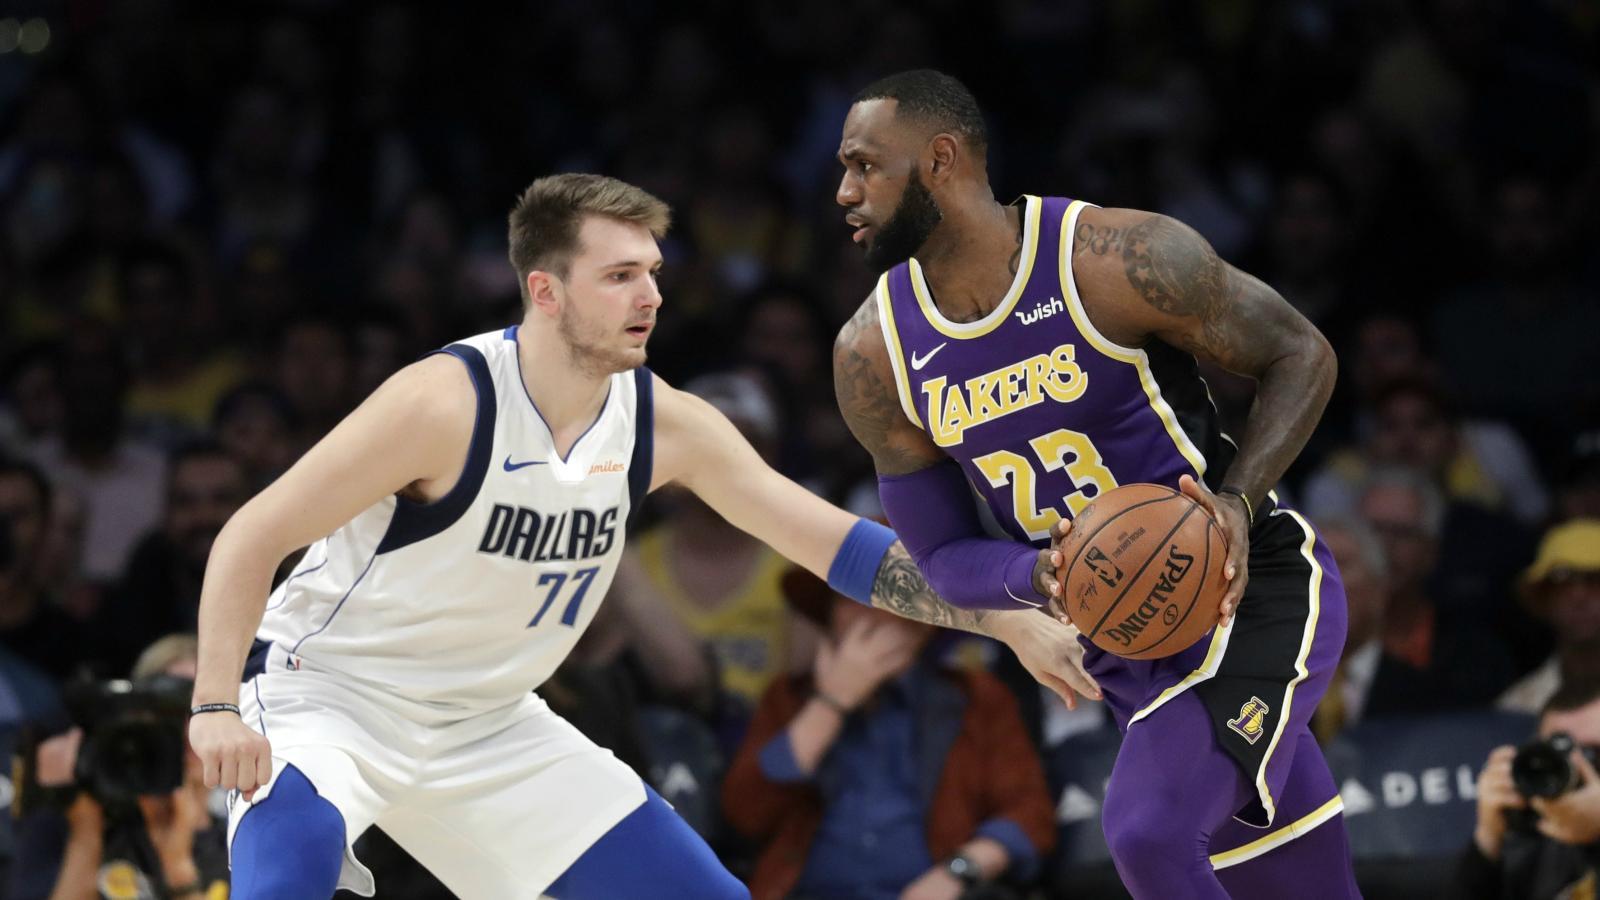 Slovenian teenager Luka Doncic could be the NBA's next LeBron James